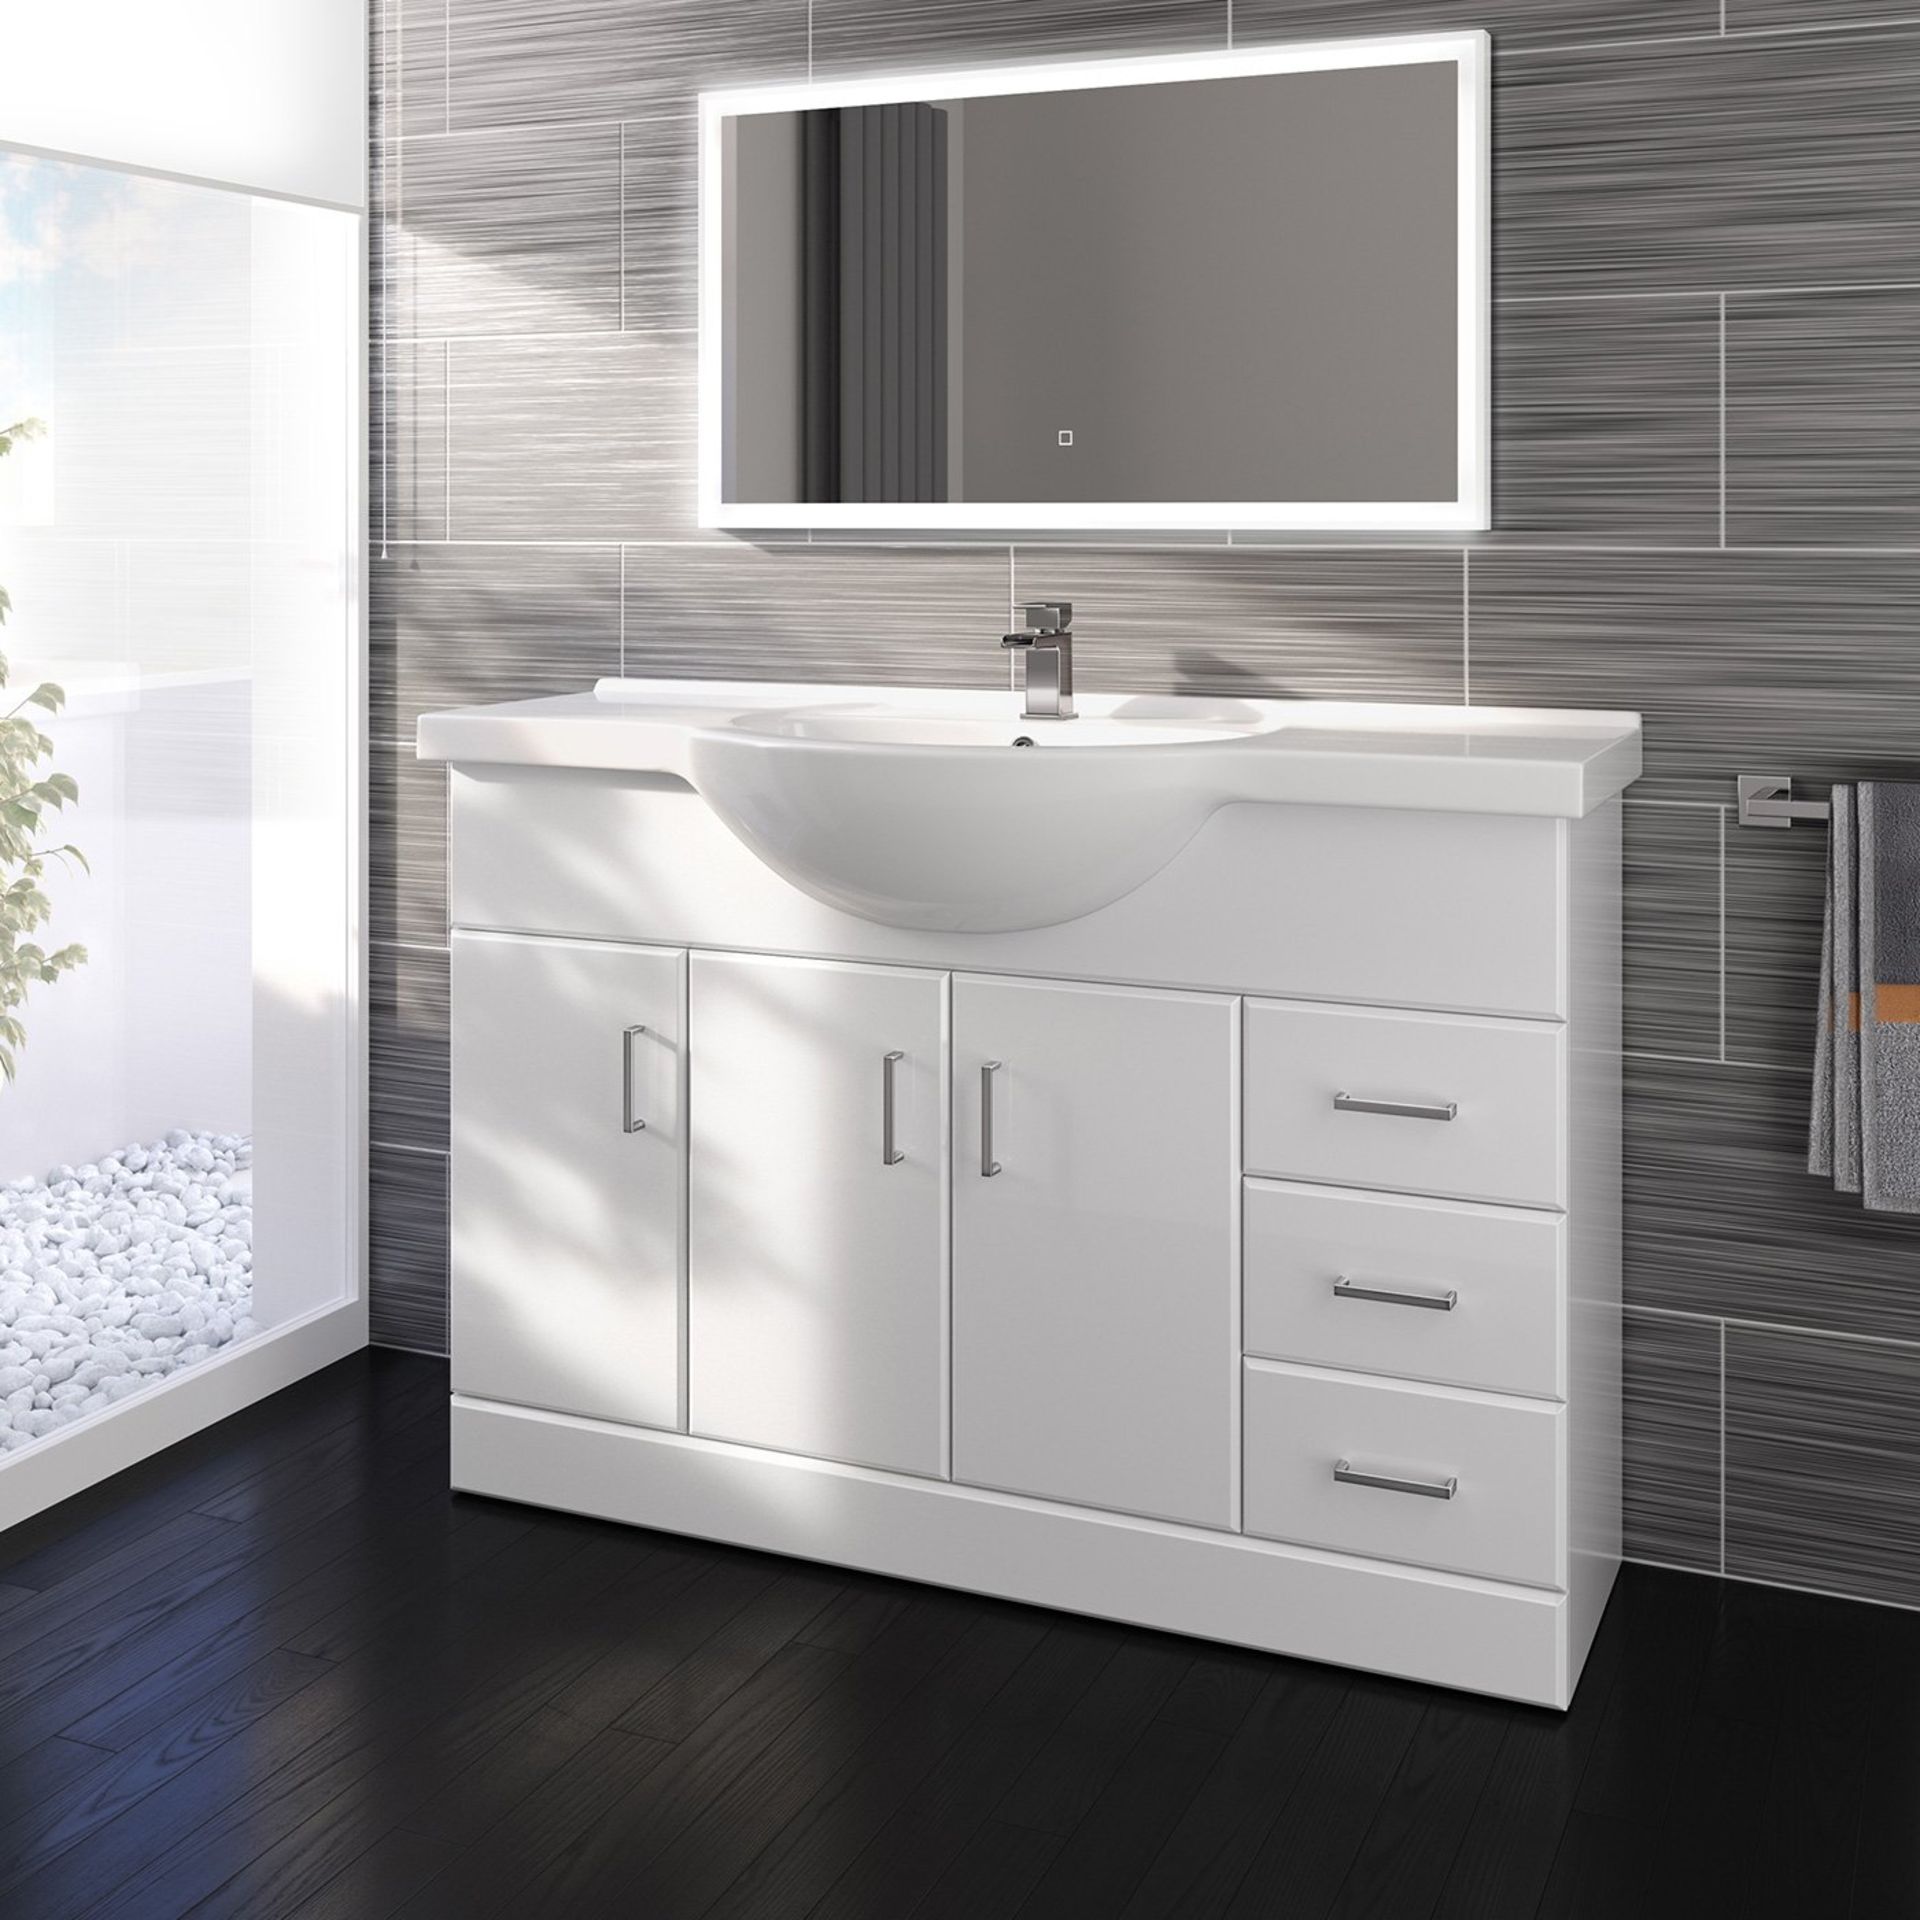 (ED256) 1200mm White Gloss Basin Vanity Unit Sink Cabinet Bathroom. Comes complete with basin. ... - Image 4 of 4